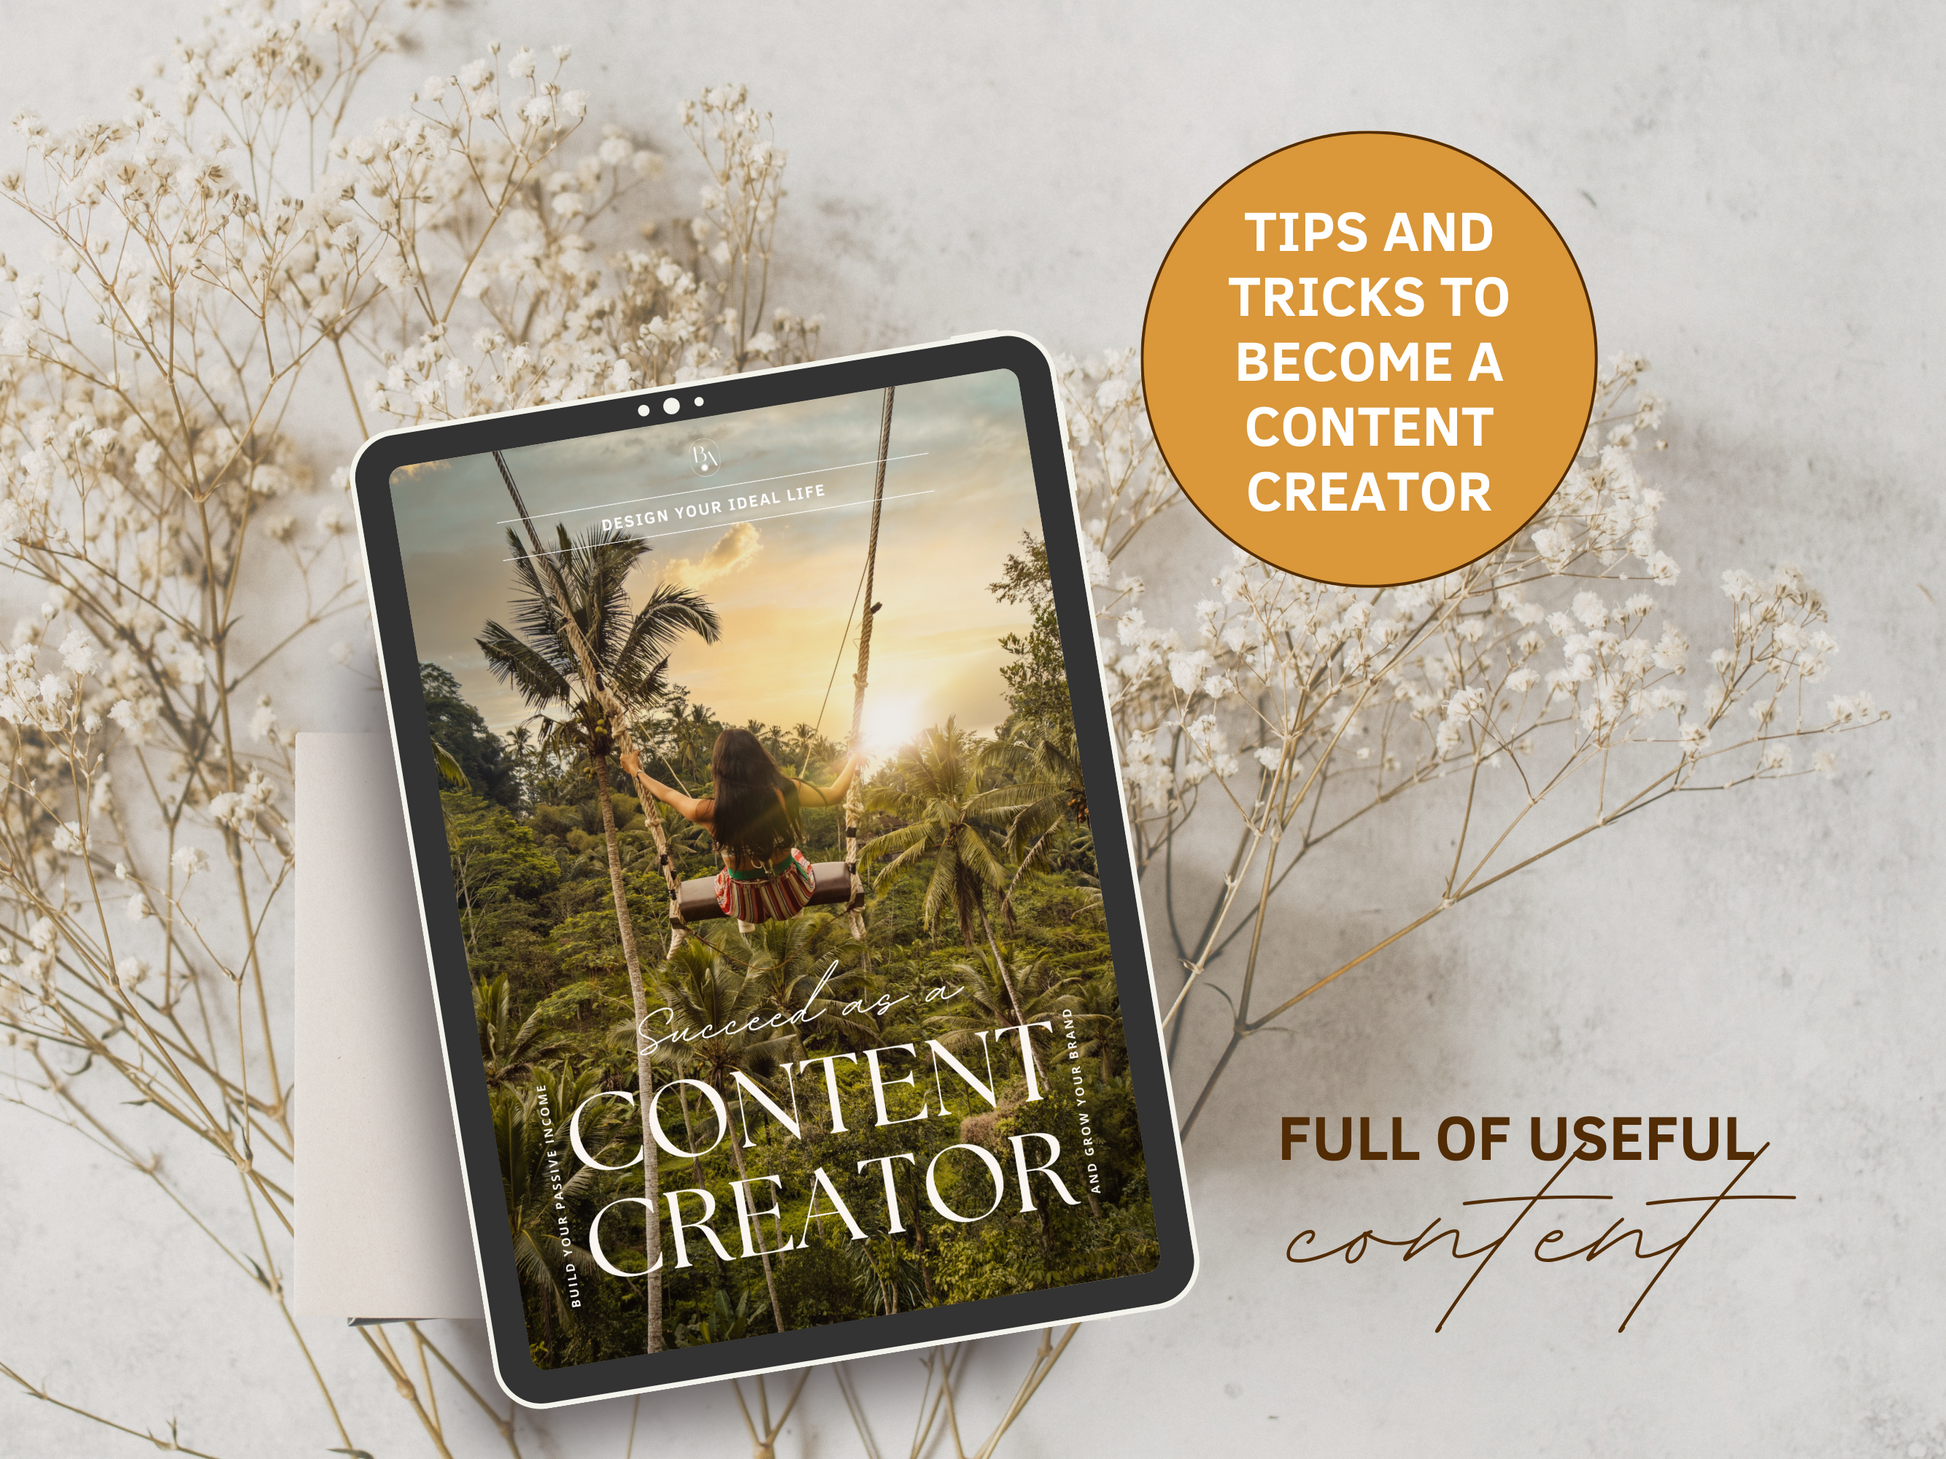 Succeed as a Content Creator PLR eBook. Design your ideal life! This eBook is full of useful content and tips and tricks to become a content creator. It's editable in Canva.